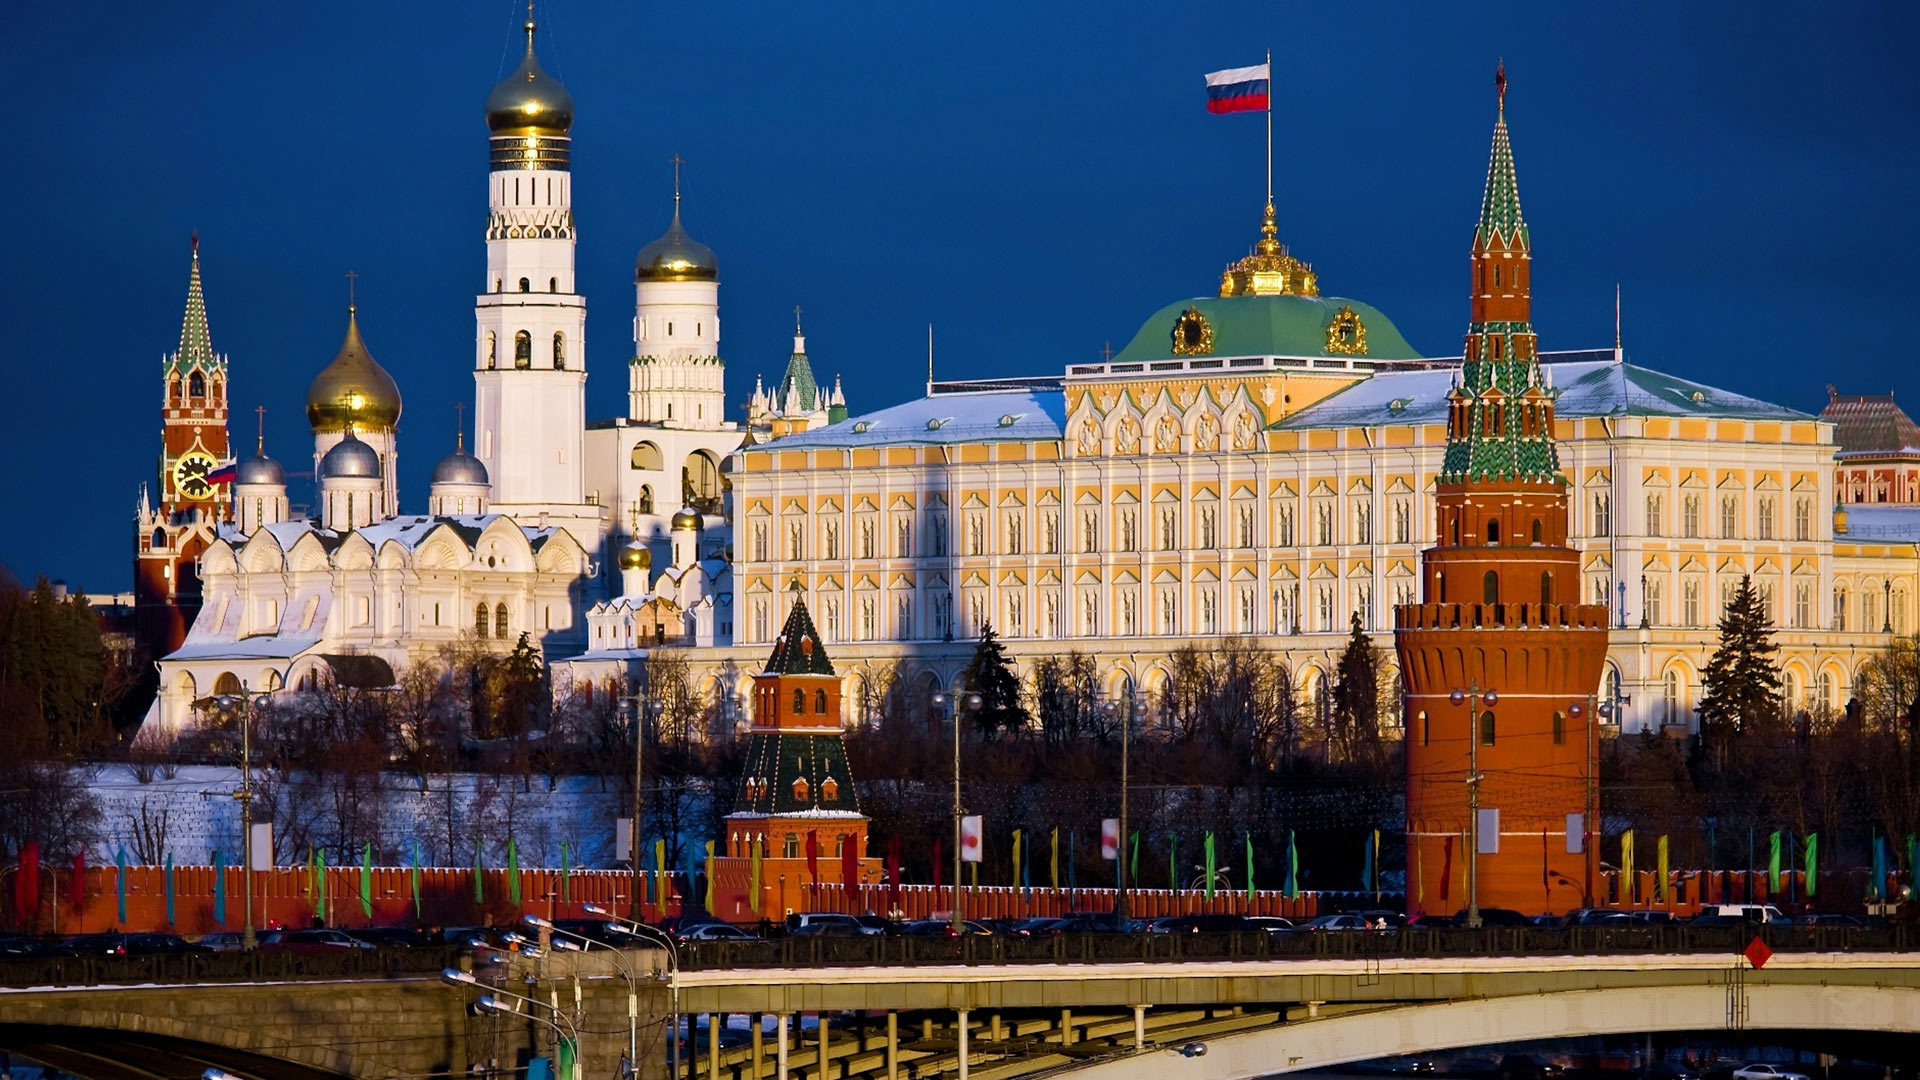 The main buildings in Moscow wallpapers and images - wallpapers ...